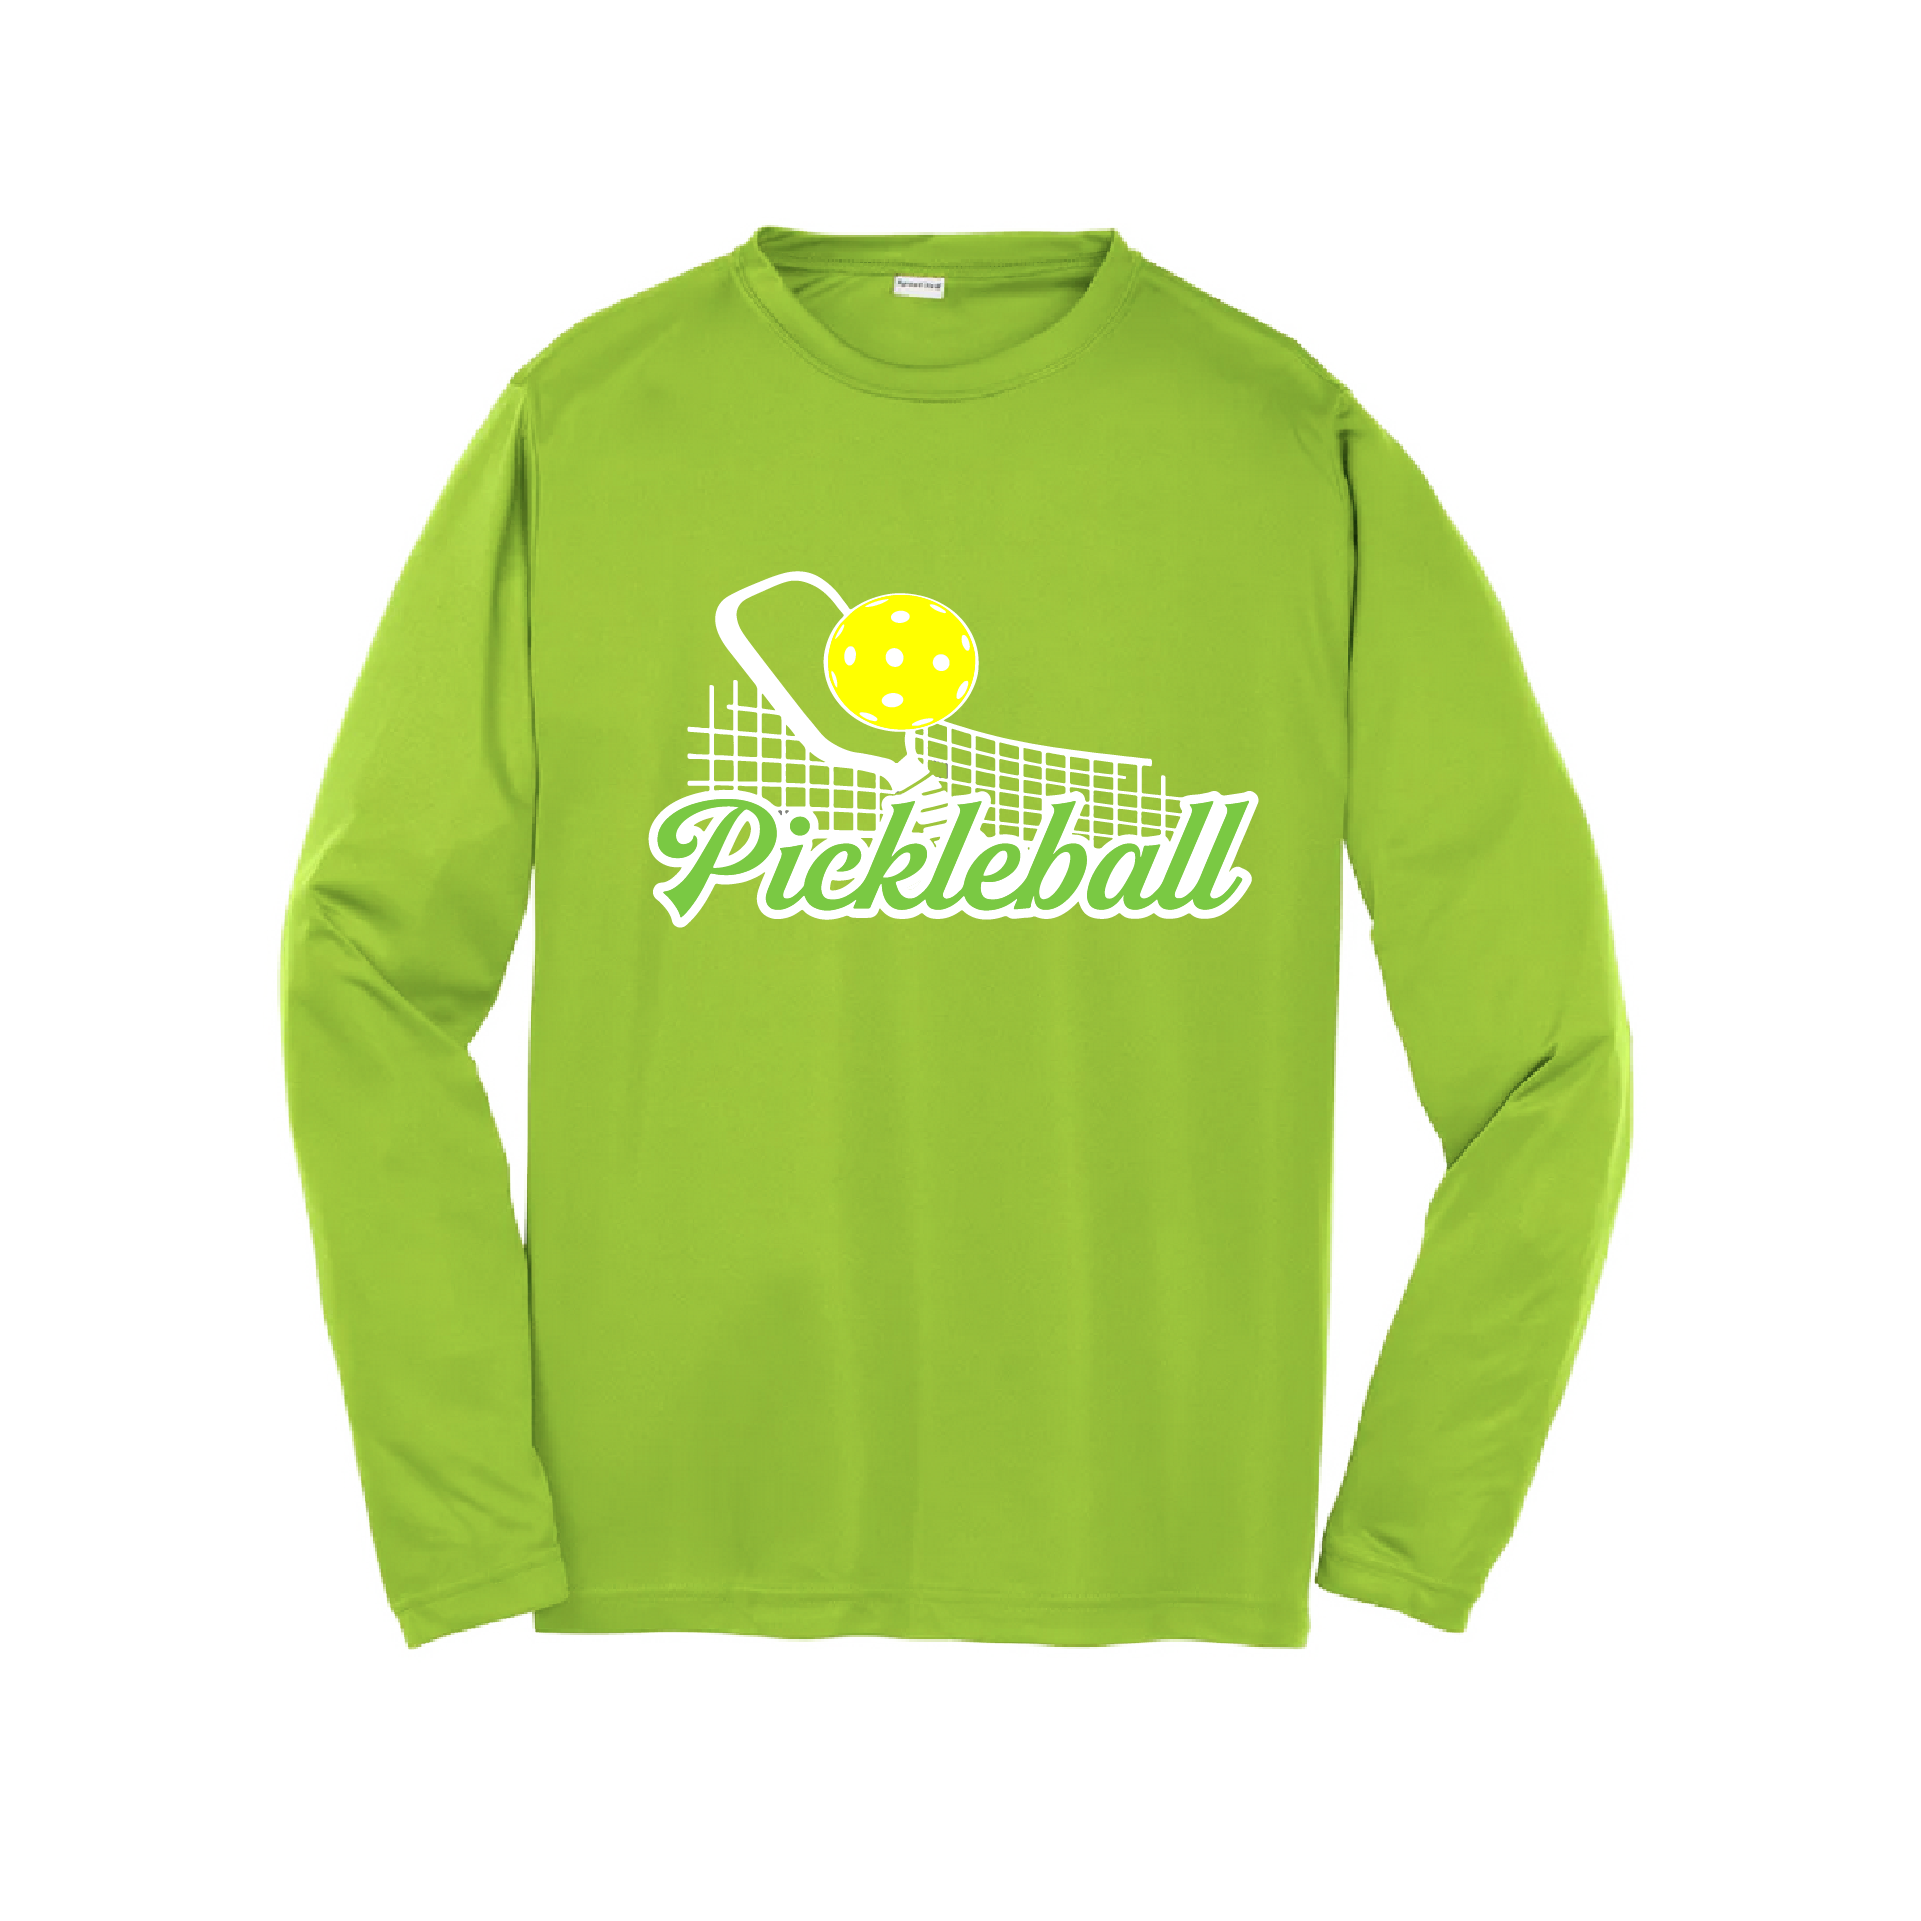 Pickleball Design: Paddle with Net  Youth Style: Long Sleeve  Shirts are lightweight, roomy and highly breathable. These moisture-wicking shirts are designed for athletic performance. They feature PosiCharge technology to lock in color and prevent logos from fading. Removable tag and set-in sleeves for comfort.